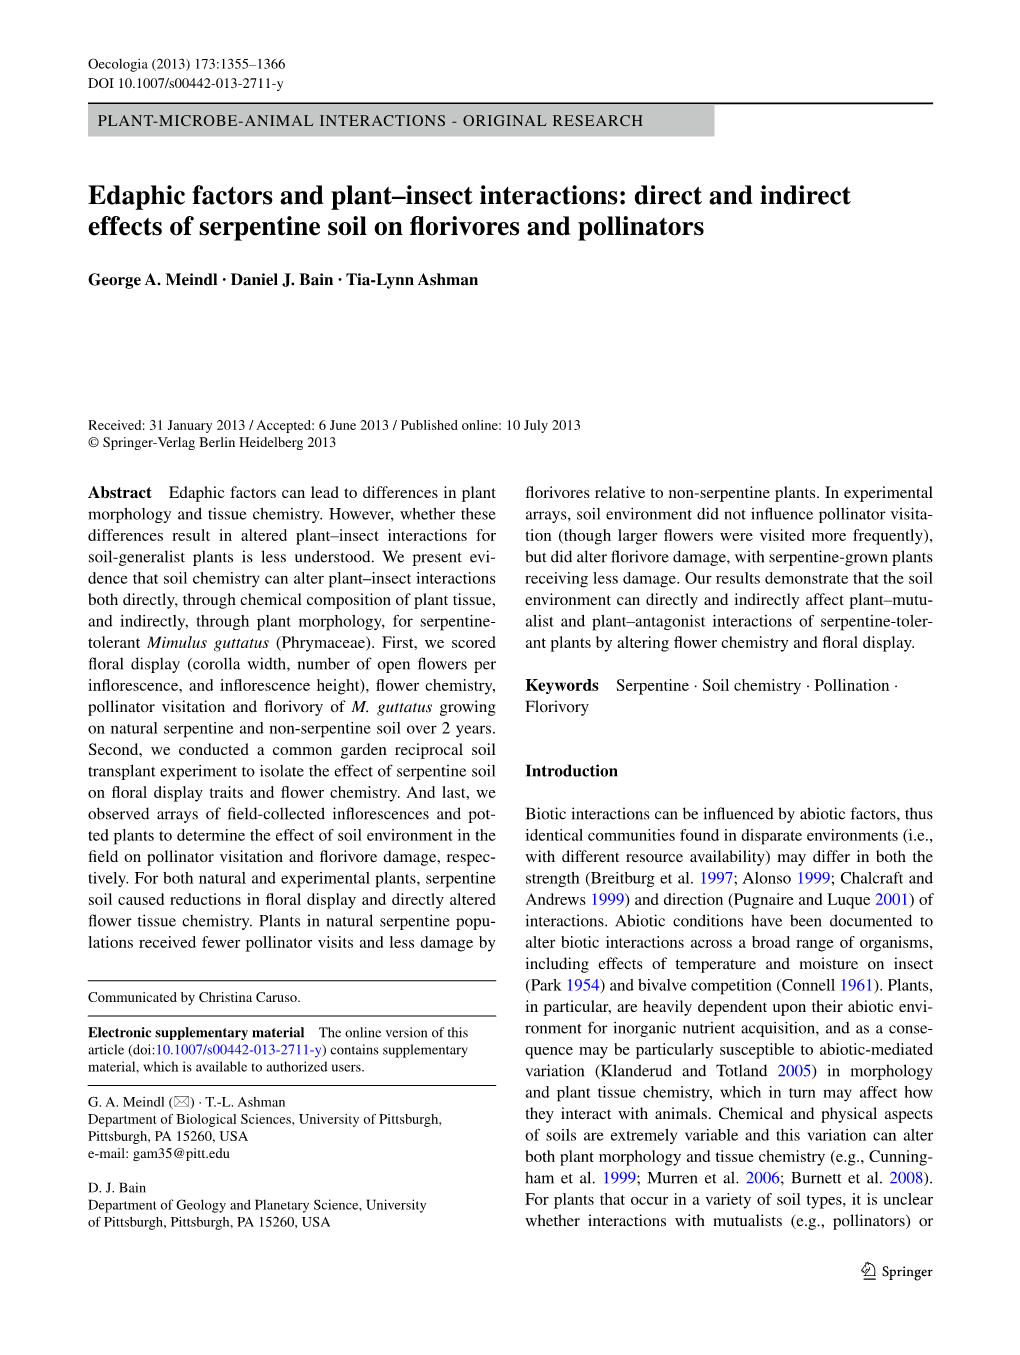 Direct and Indirect Effects of Serpentine Soil on Florivores and Pollinators